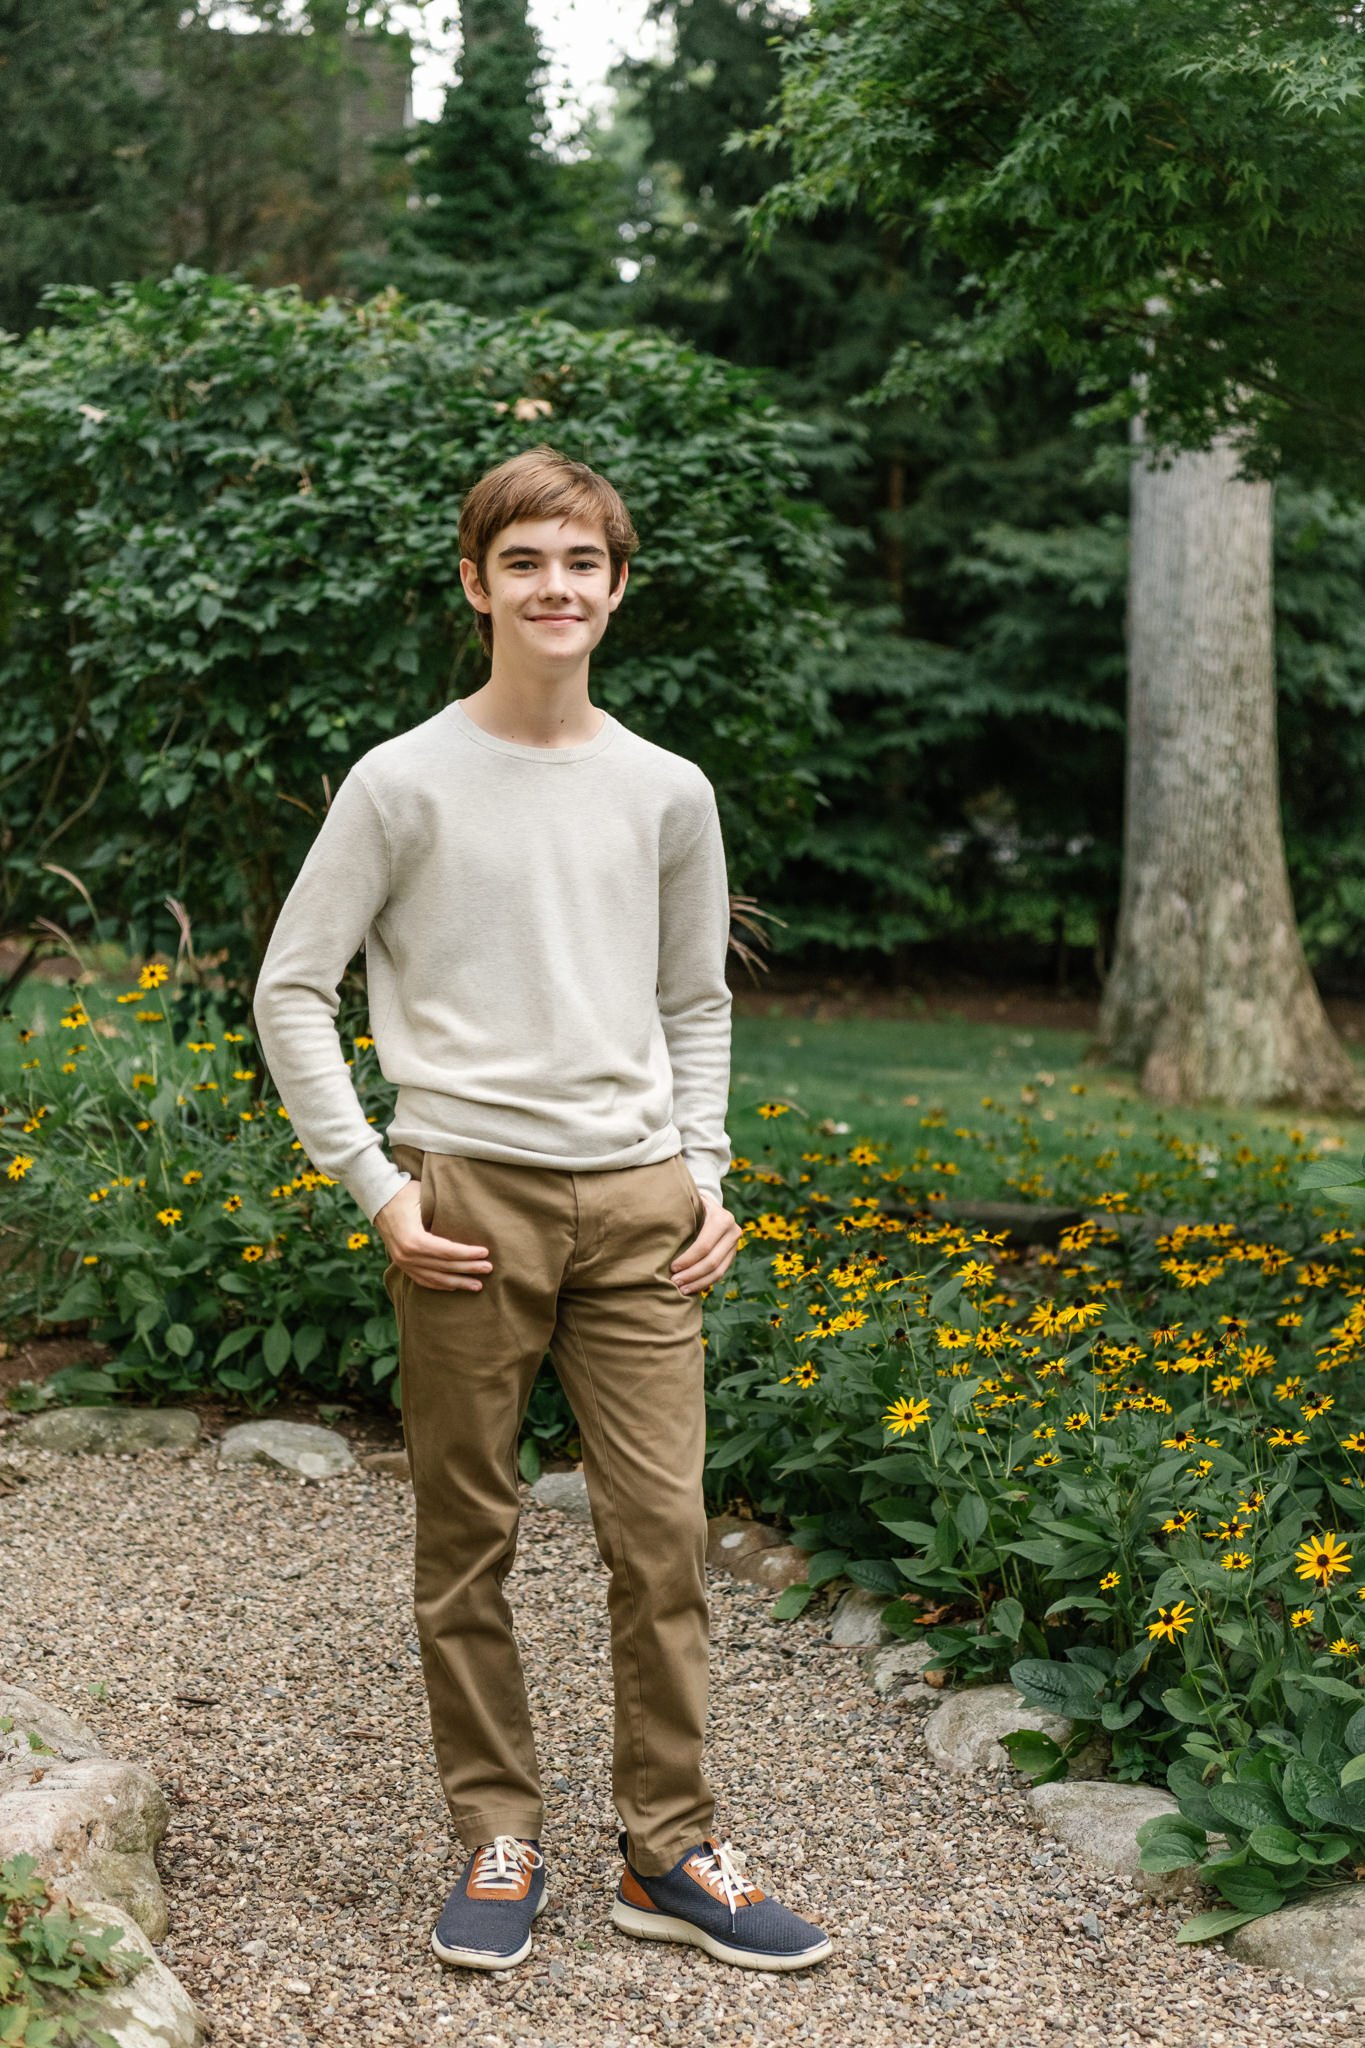  A portrait of a young man in his teens captured by Nicole Hawkins Photography. teenage boy style teenage clothes for portrait #NicoleHawkinsPhotography #NicoleHawkinsFamilyPortrait #NicoleHawkinsSenior #NJPortraits #siblingportrait 